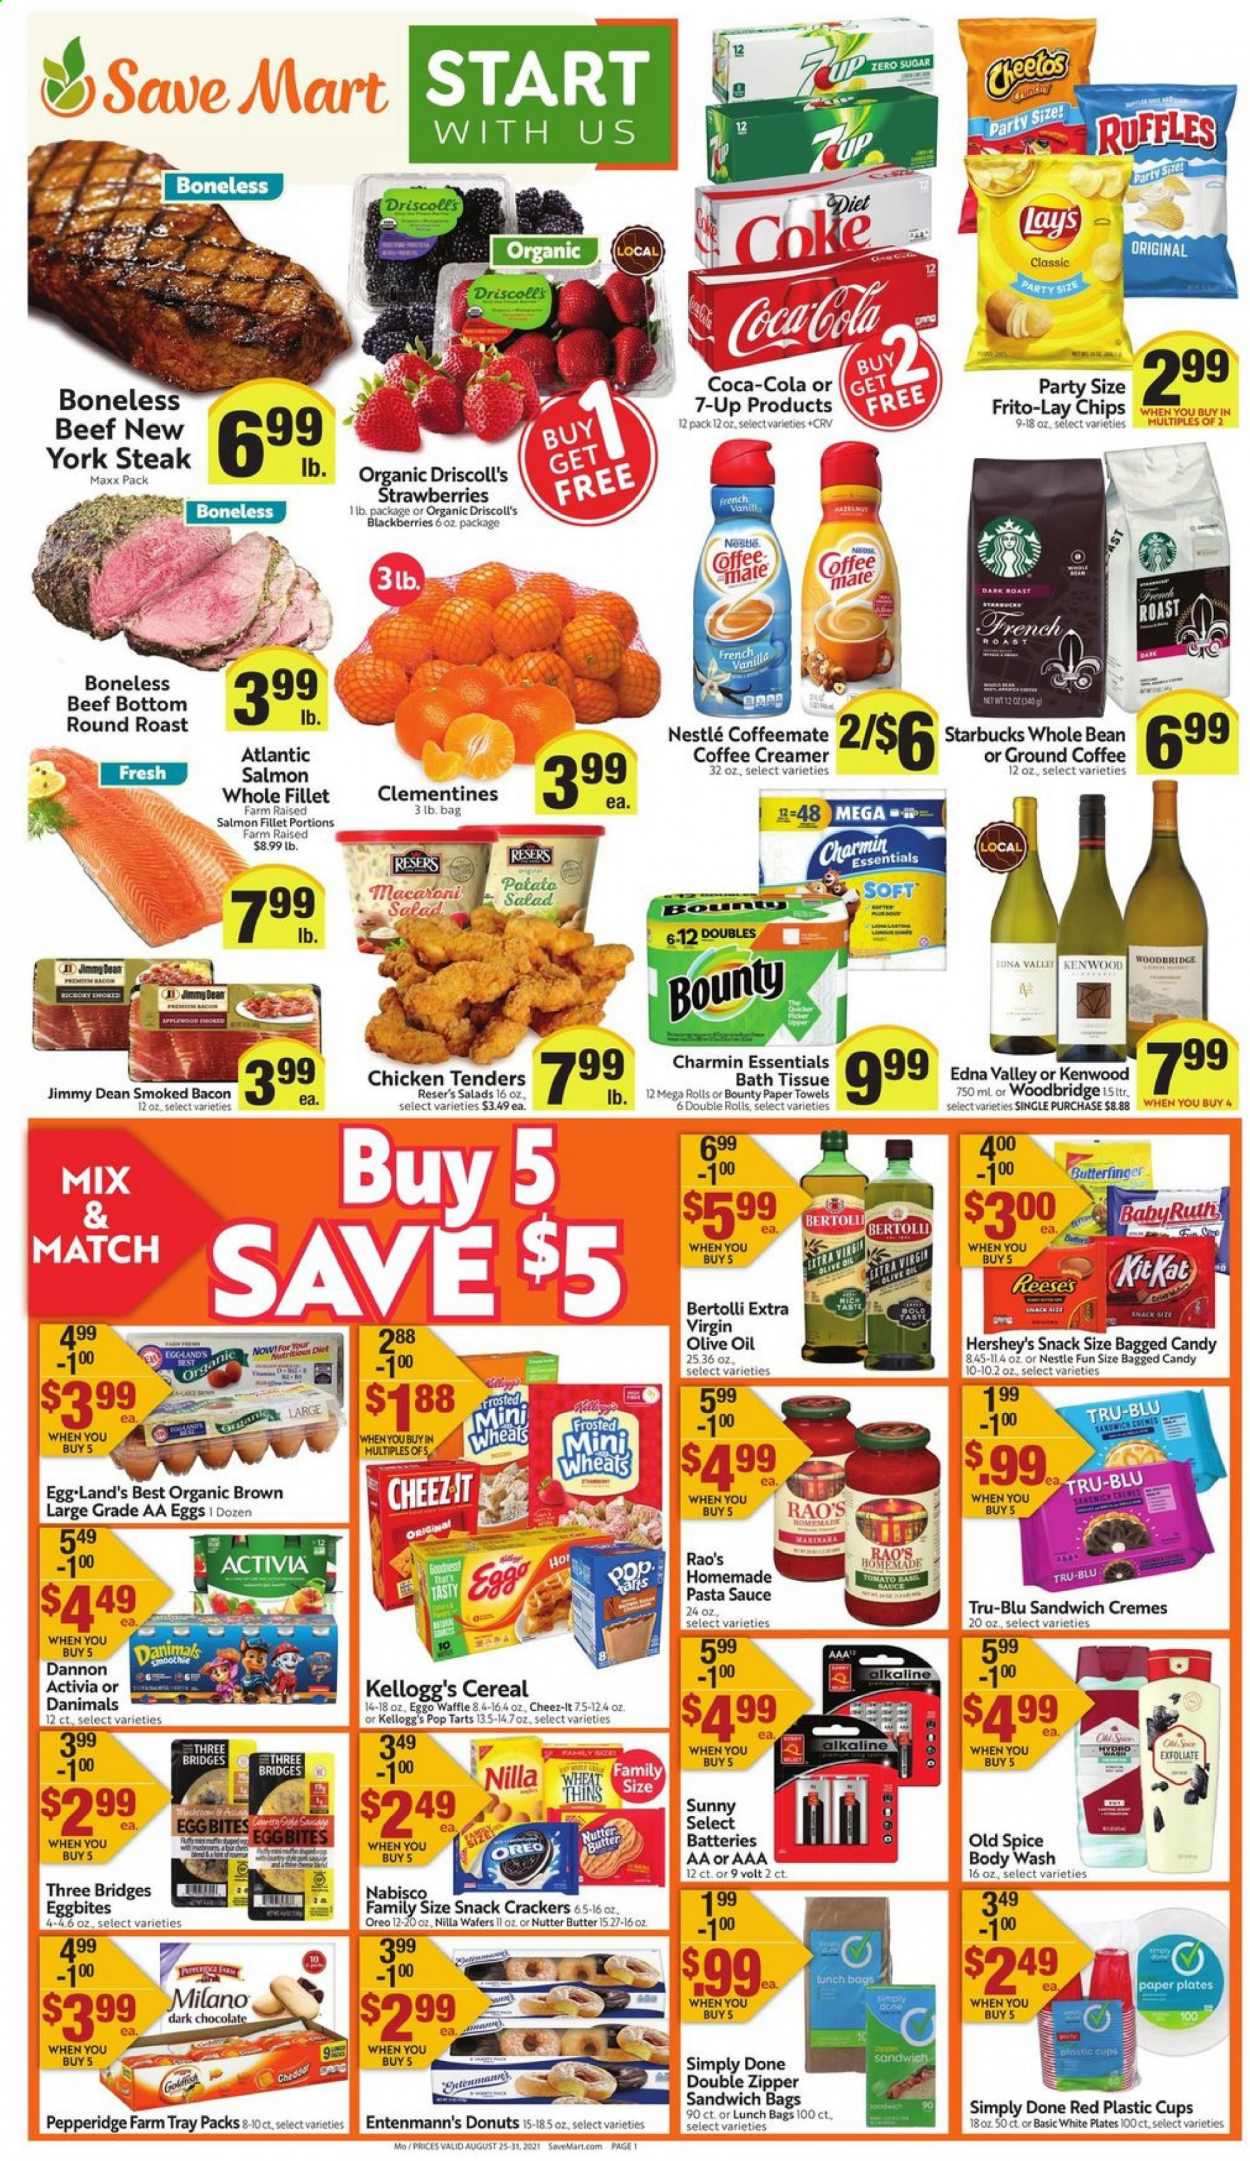 thumbnail - Save Mart Flyer - 08/25/2021 - 08/31/2021 - Sales products - donut, Entenmann's, blackberries, strawberries, chicken tenders, beef meat, steak, round roast, salmon, salmon fillet, pasta sauce, sauce, Bertolli, Jimmy Dean, bacon, cheese, Oreo, Activia, Dannon, Danimals, Coffee-Mate, eggs, butter, creamer, Reese's, Hershey's, Nestlé, wafers, chocolate, snack, Bounty, crackers, Kellogg's, dark chocolate, Pop-Tarts, chips, Lay’s, Thins, Frito-Lay, Cheez-It, Ruffles, cereals, spice, extra virgin olive oil, olive oil, oil, Coca-Cola, 7UP, smoothie, Starbucks, ground coffee, Woodbridge, body wash, Old Spice, paper plate, clementines. Page 1.